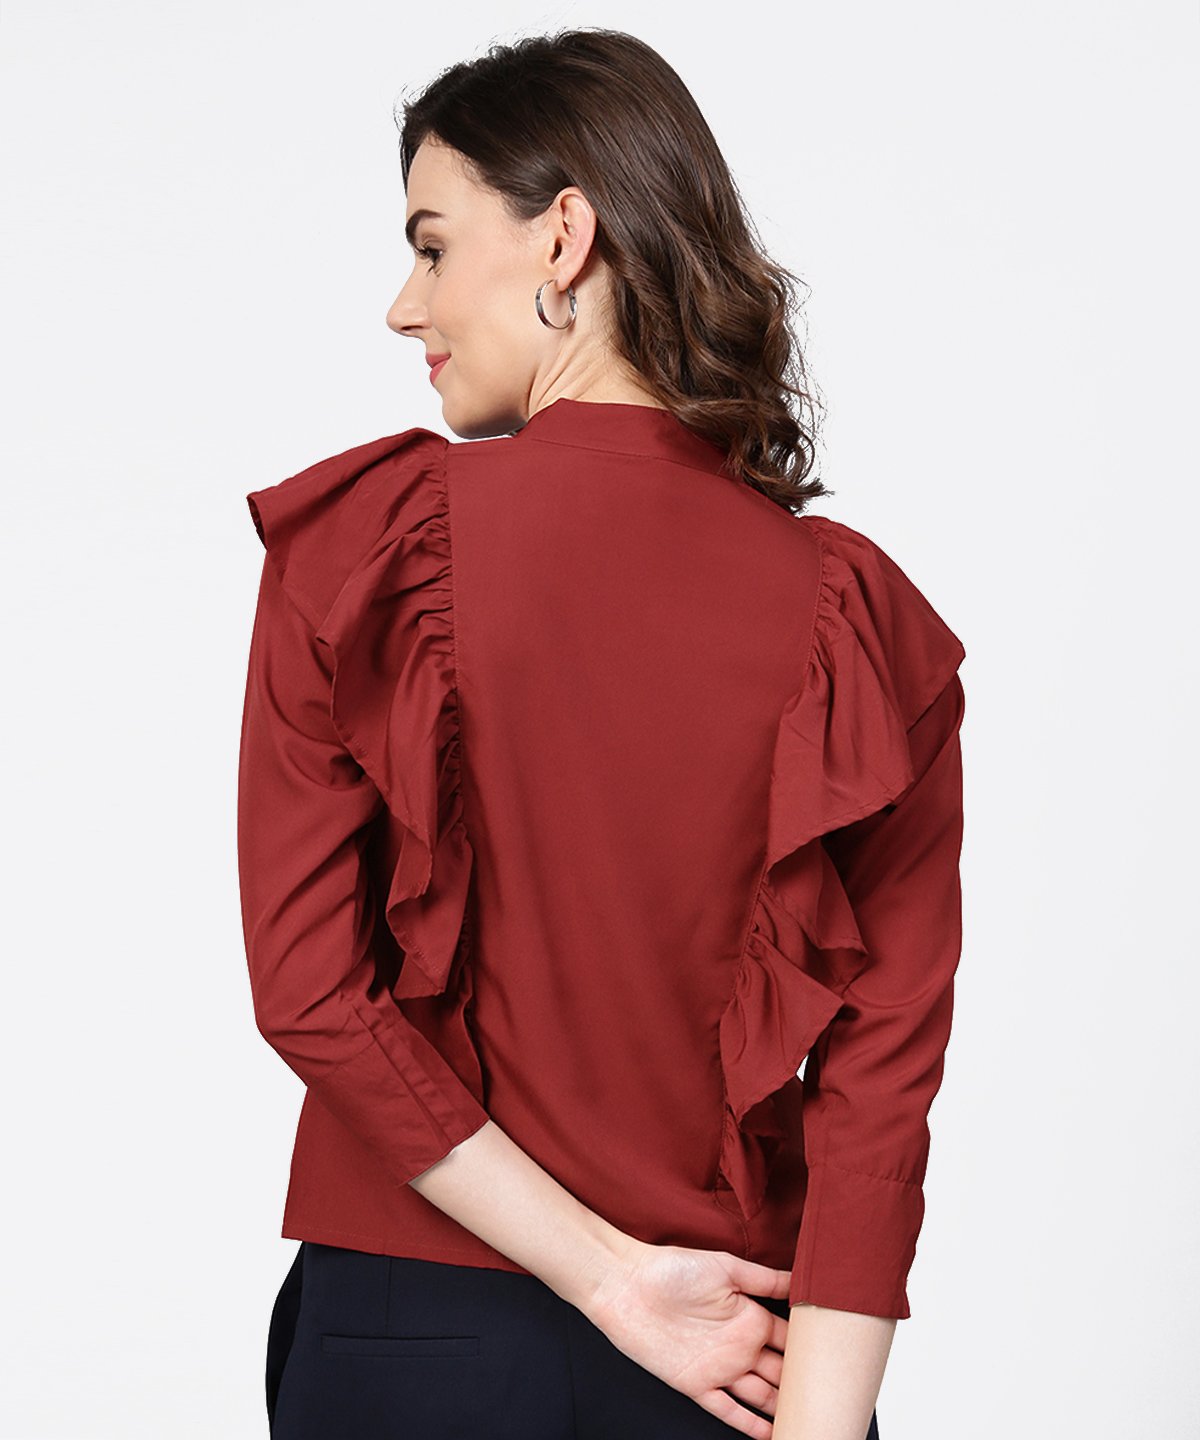 Women's Maroon Full Sleeve Crepe Tops With Layred Design At Front - Nayo Clothing